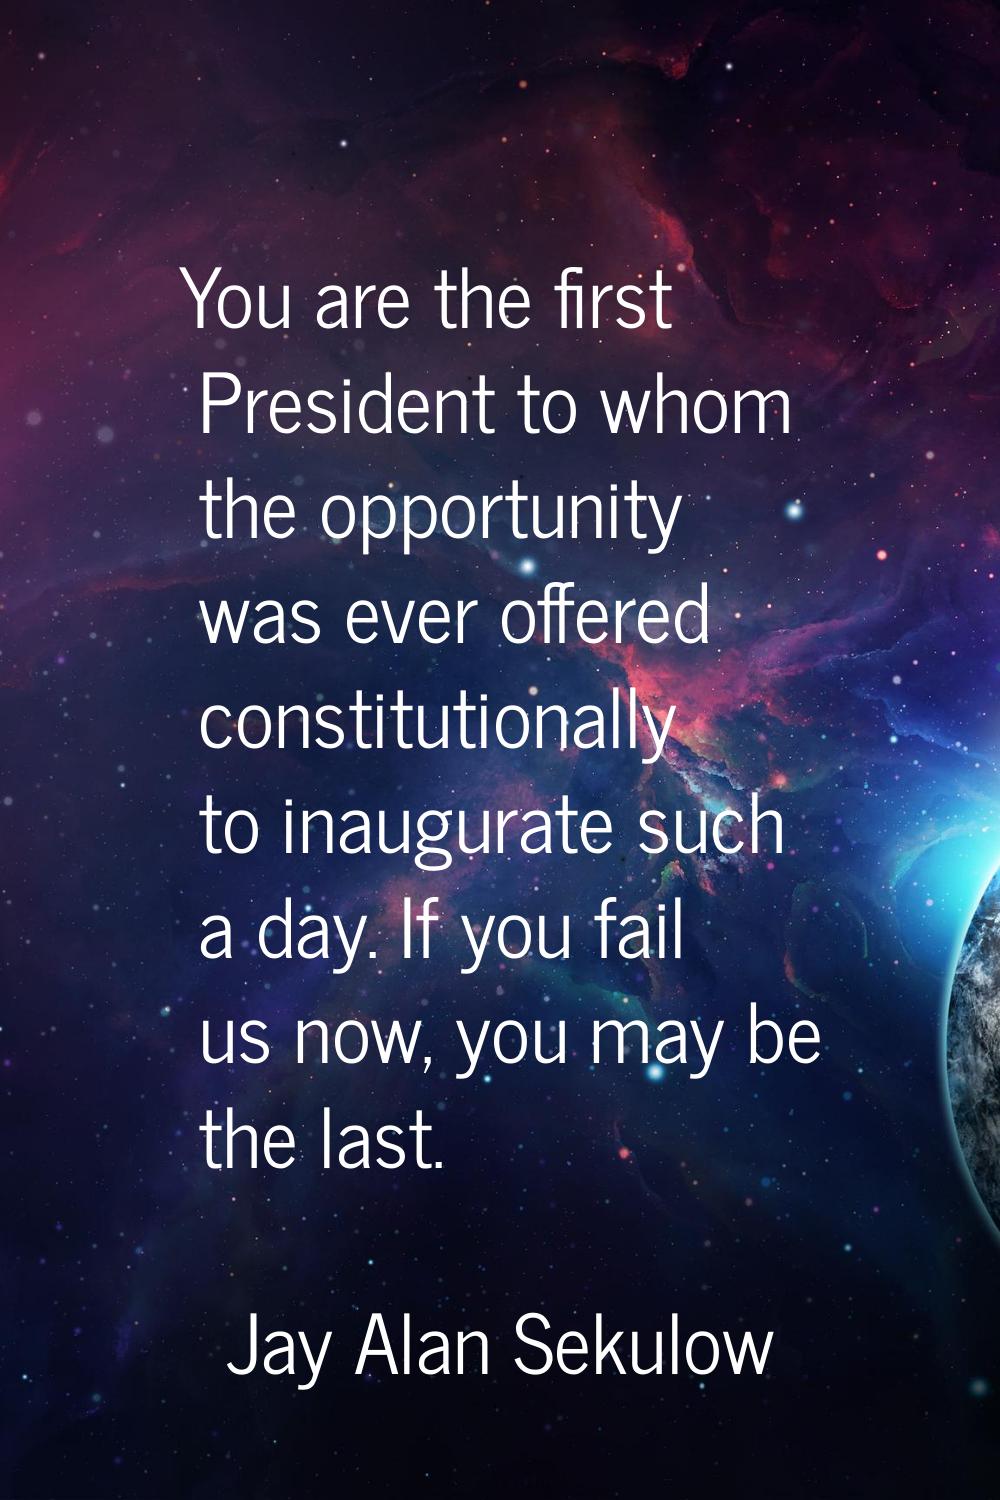 You are the first President to whom the opportunity was ever offered constitutionally to inaugurate